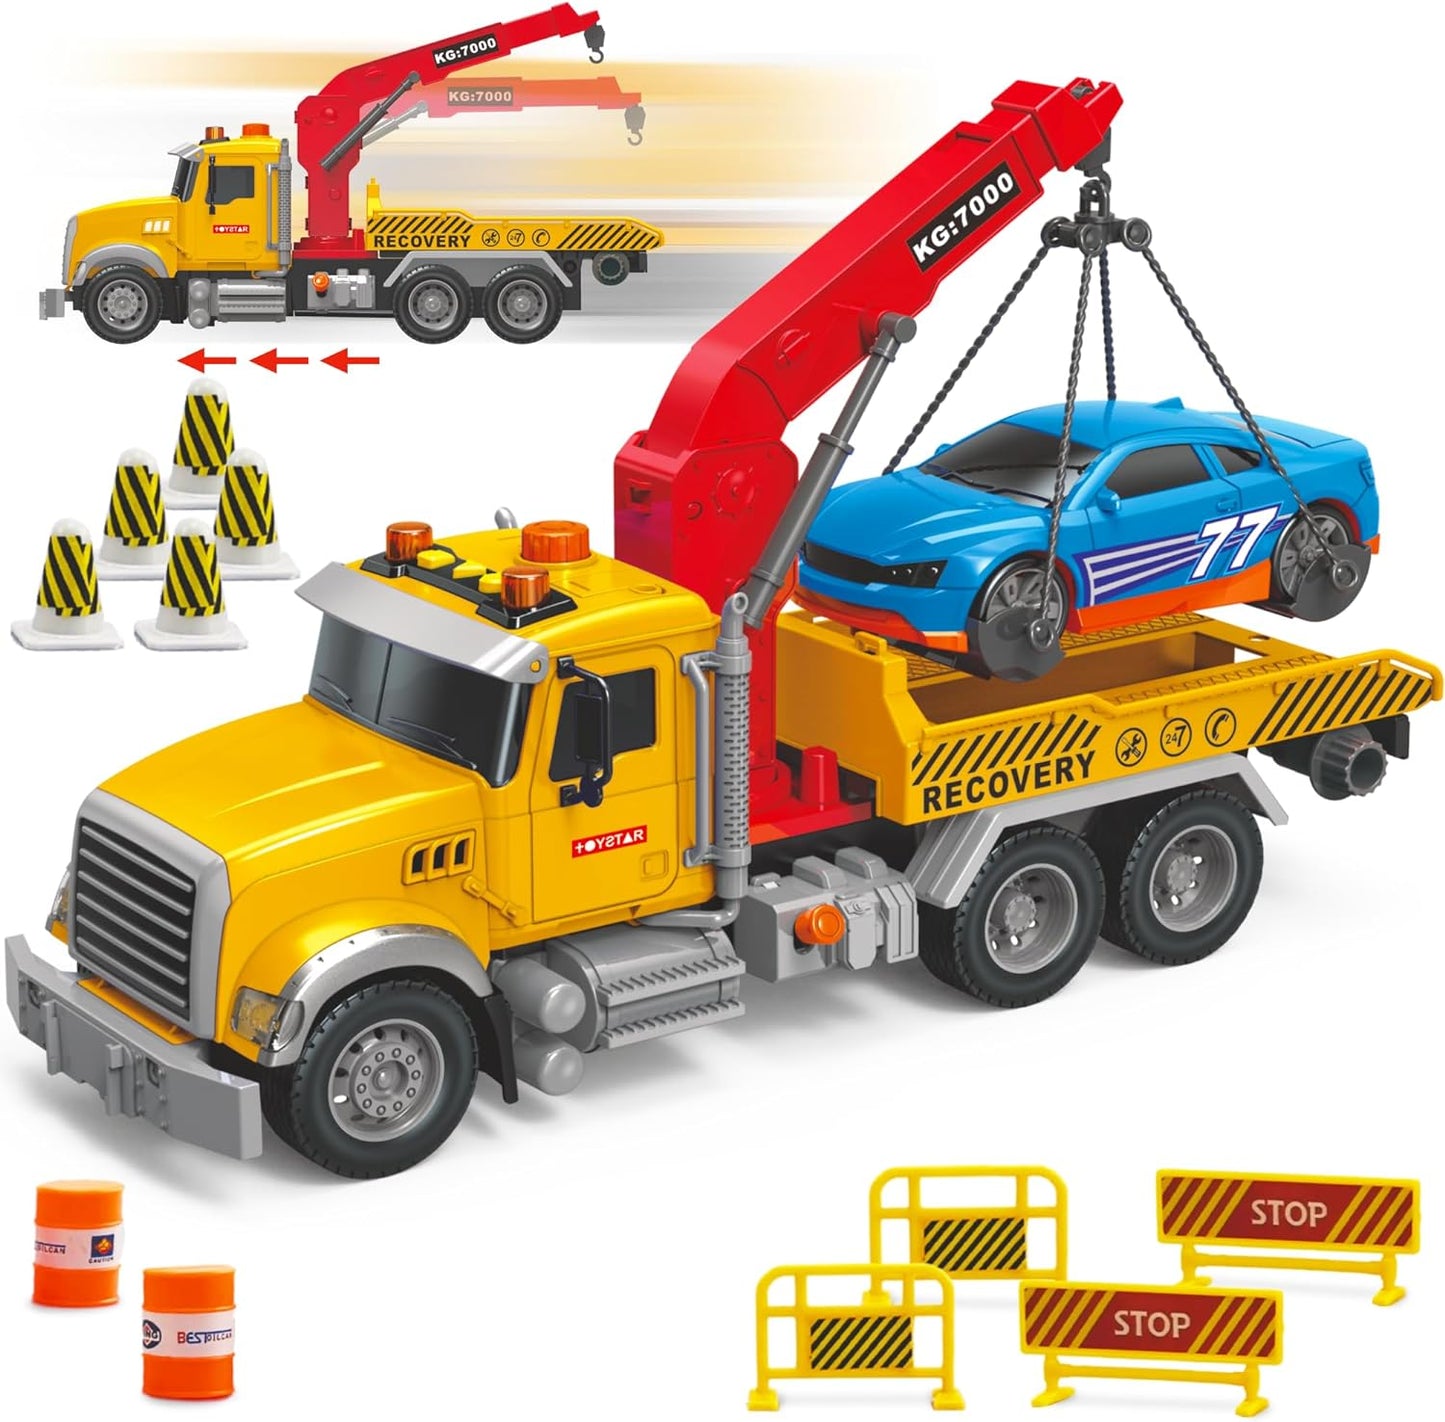 Tow Truck Toy Flatbed and Crane